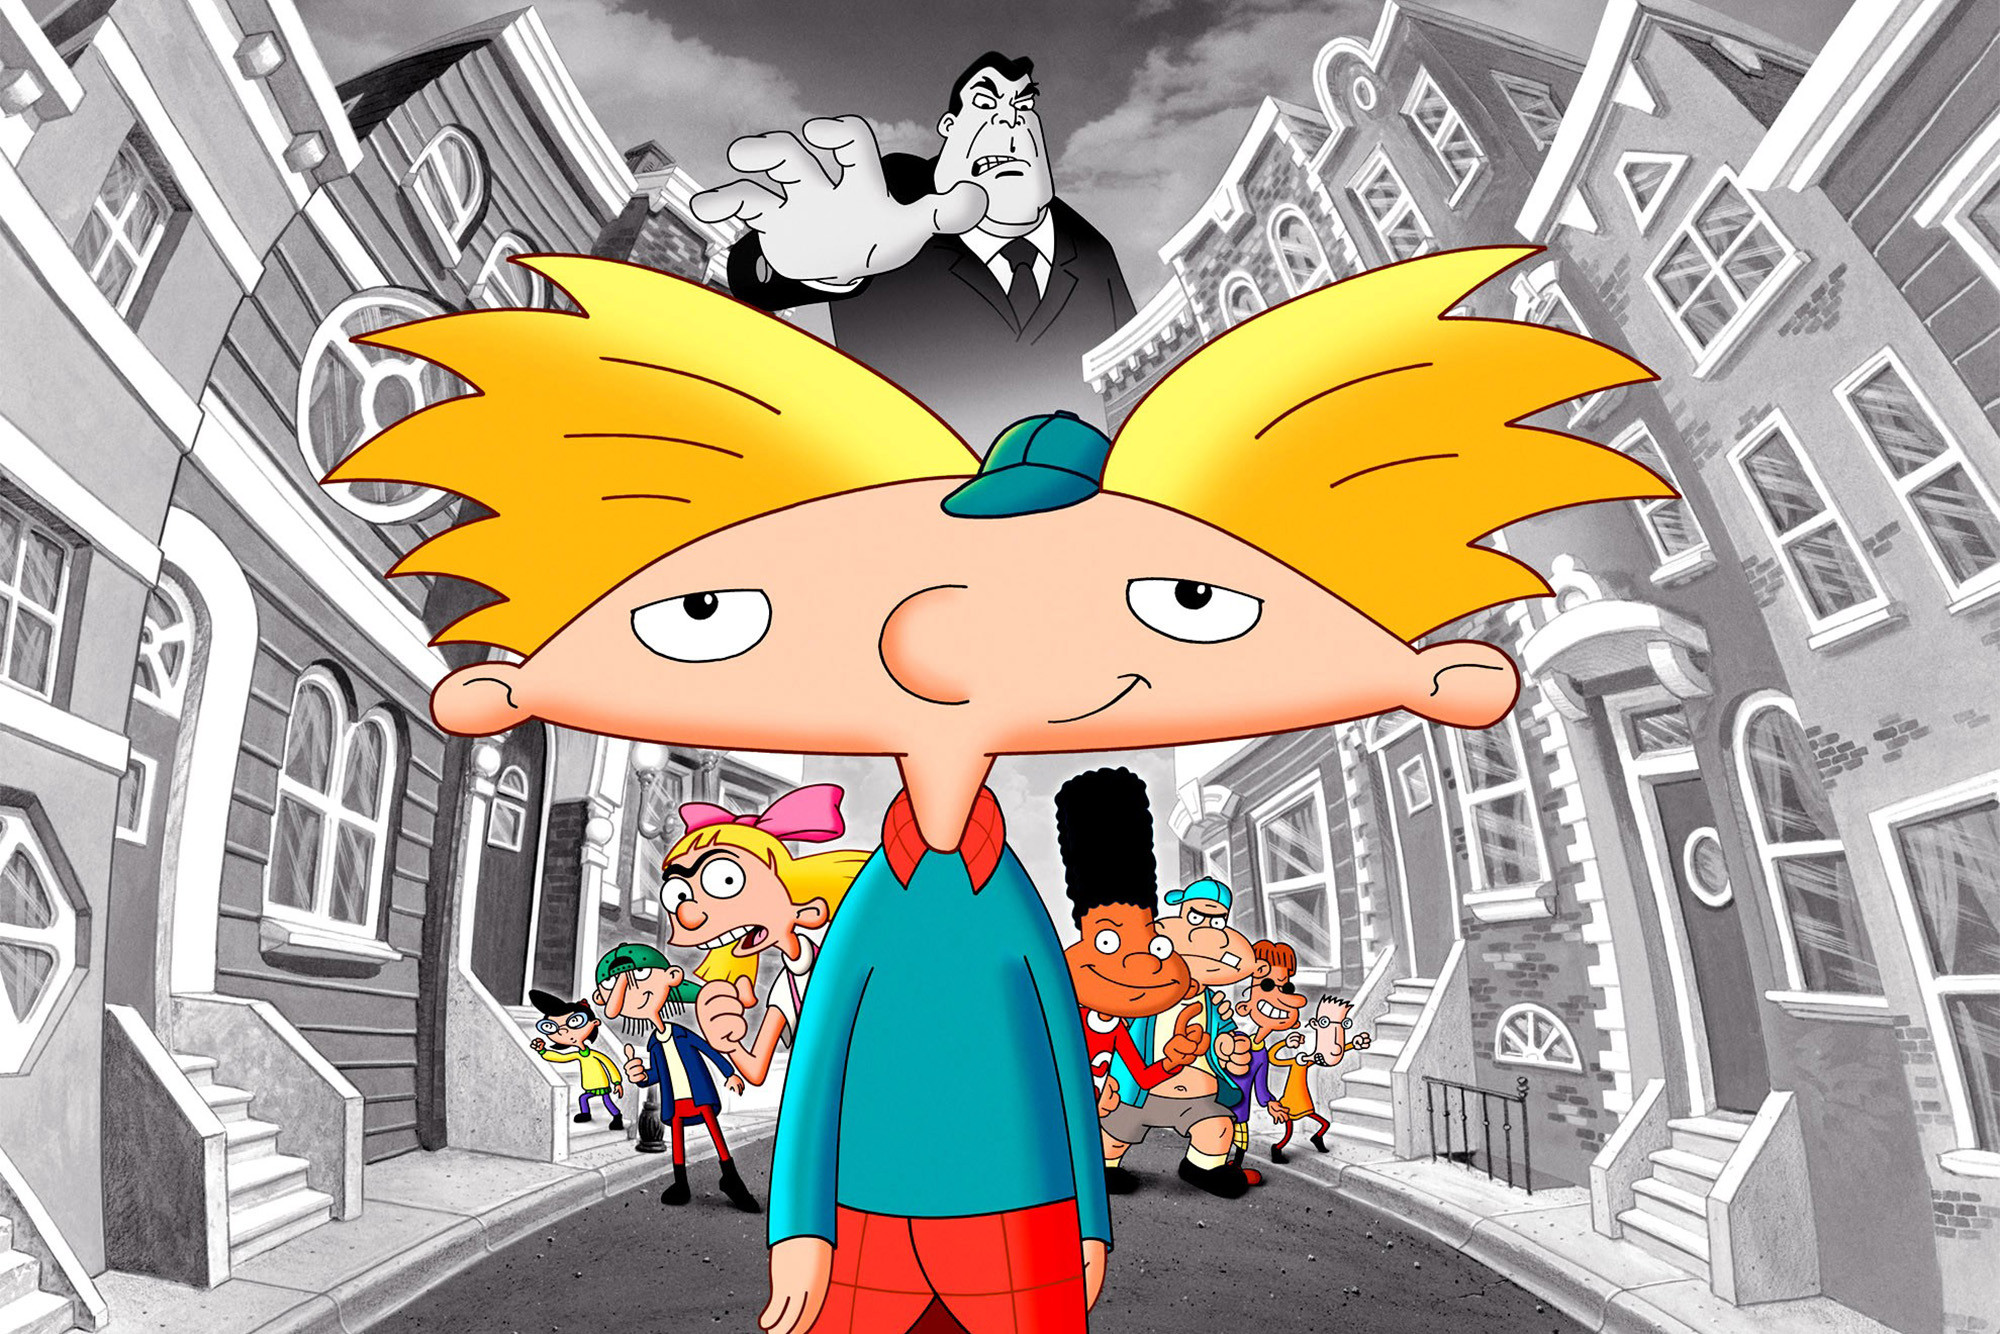 Hey Arnold! Backgrounds, Compatible - PC, Mobile, Gadgets| 2000x1334 px